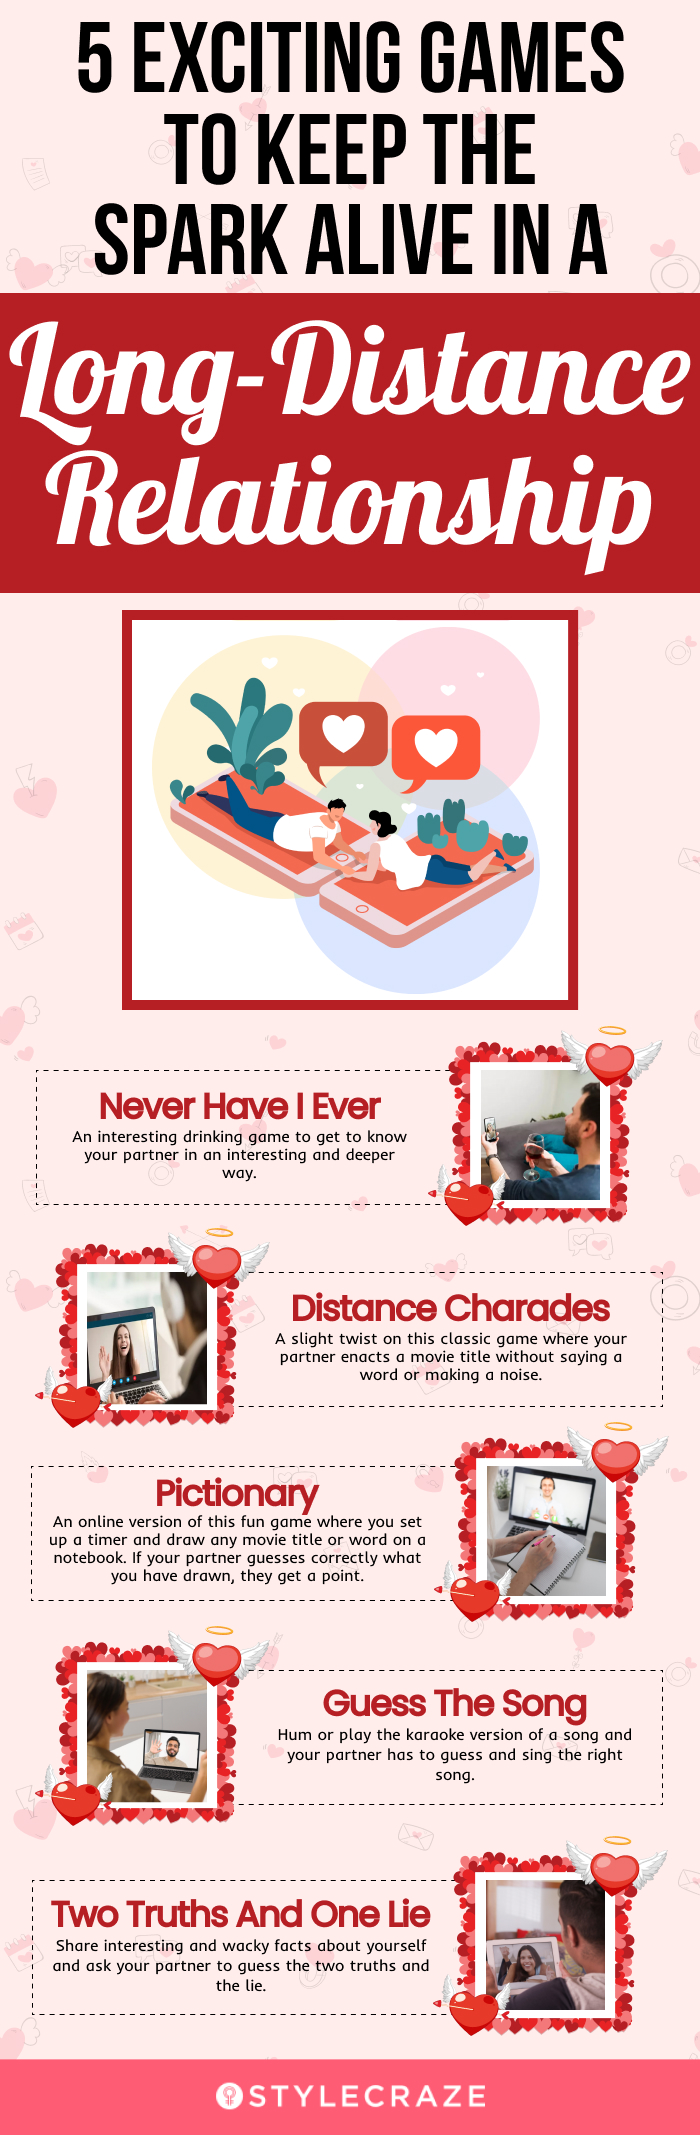 5 exciting games to keep the spark alive in a longdistance relationship (infographic)